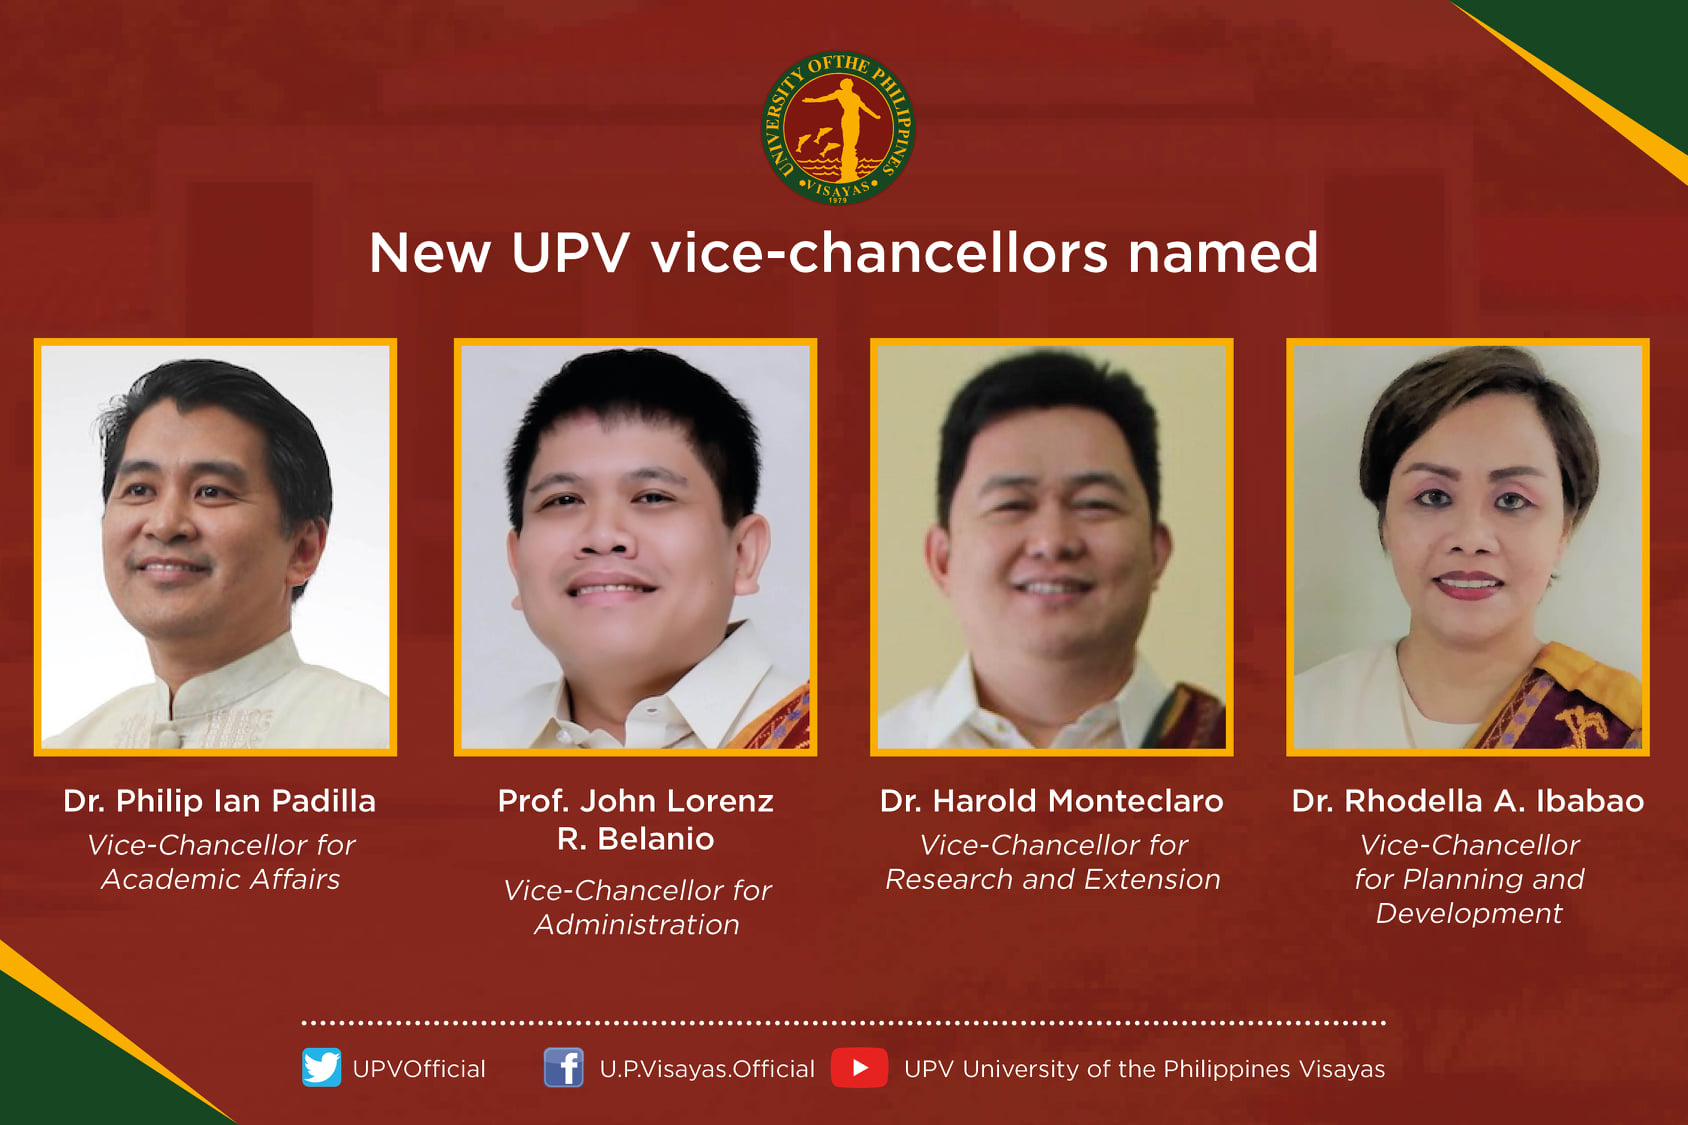 New UPV vice-chancellors named